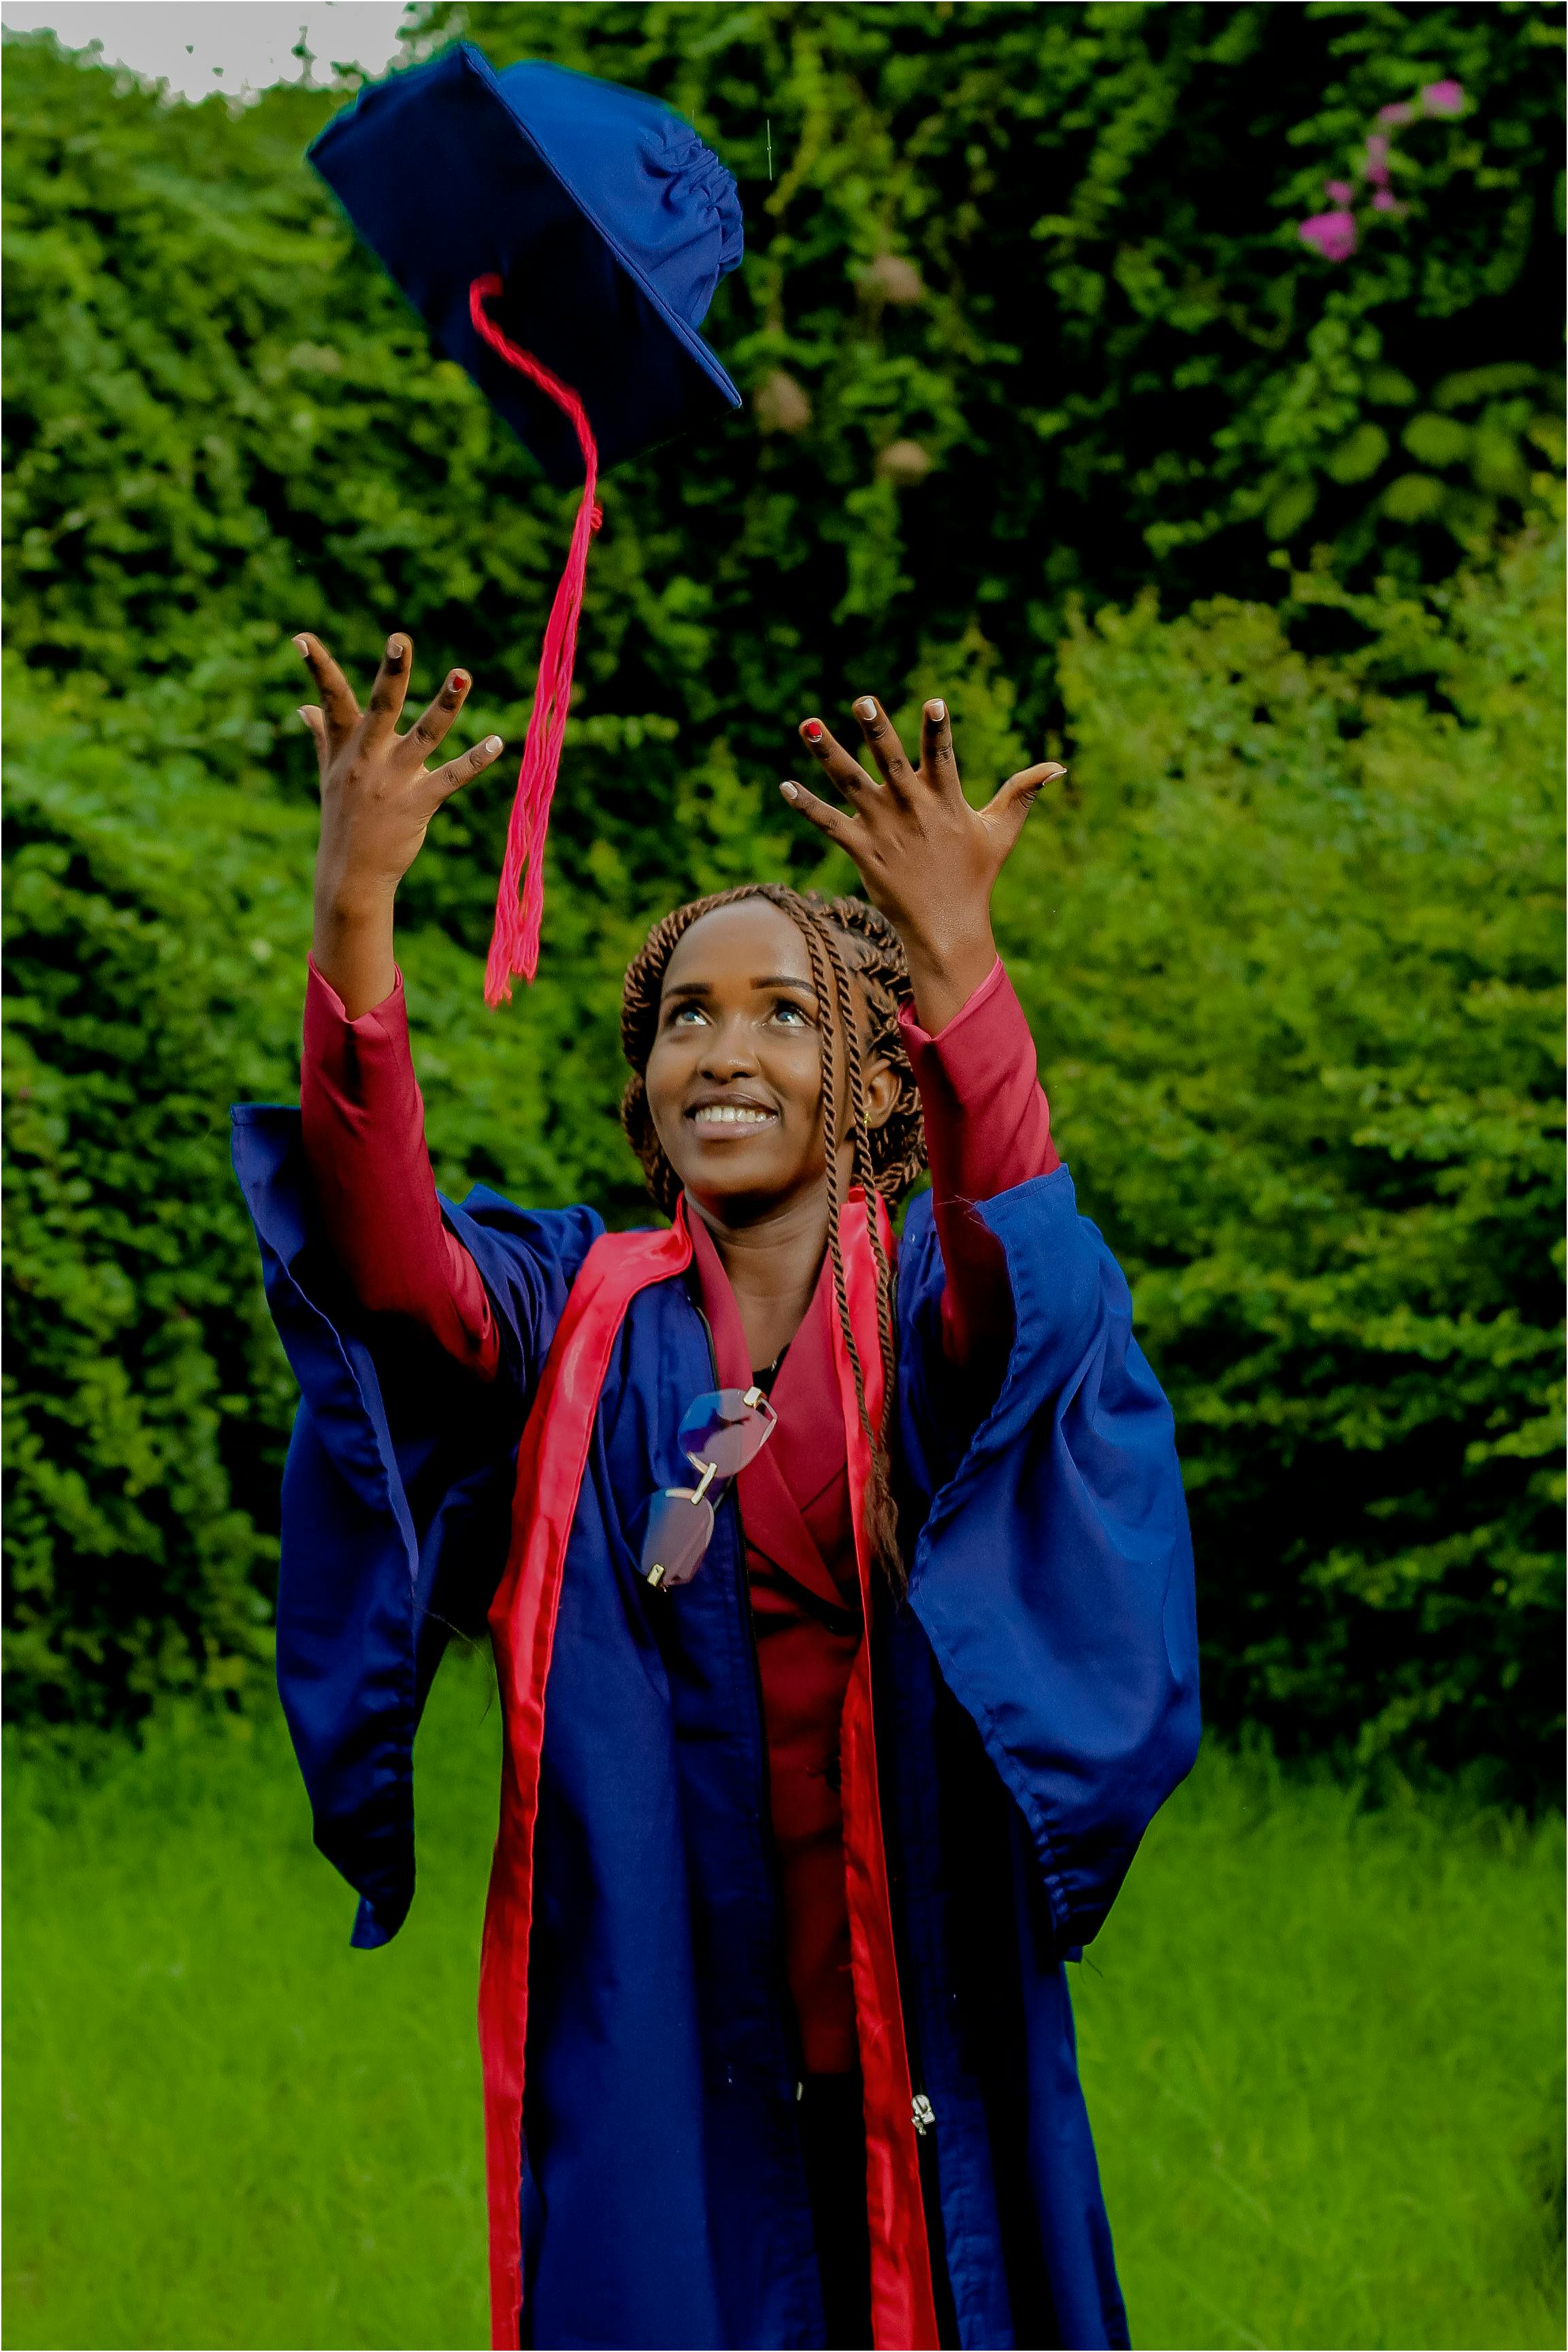 Portrait Of A Young Boy Wearing A Graduation Gown Holding A Diploma  High-Res Stock Photo - Getty Images